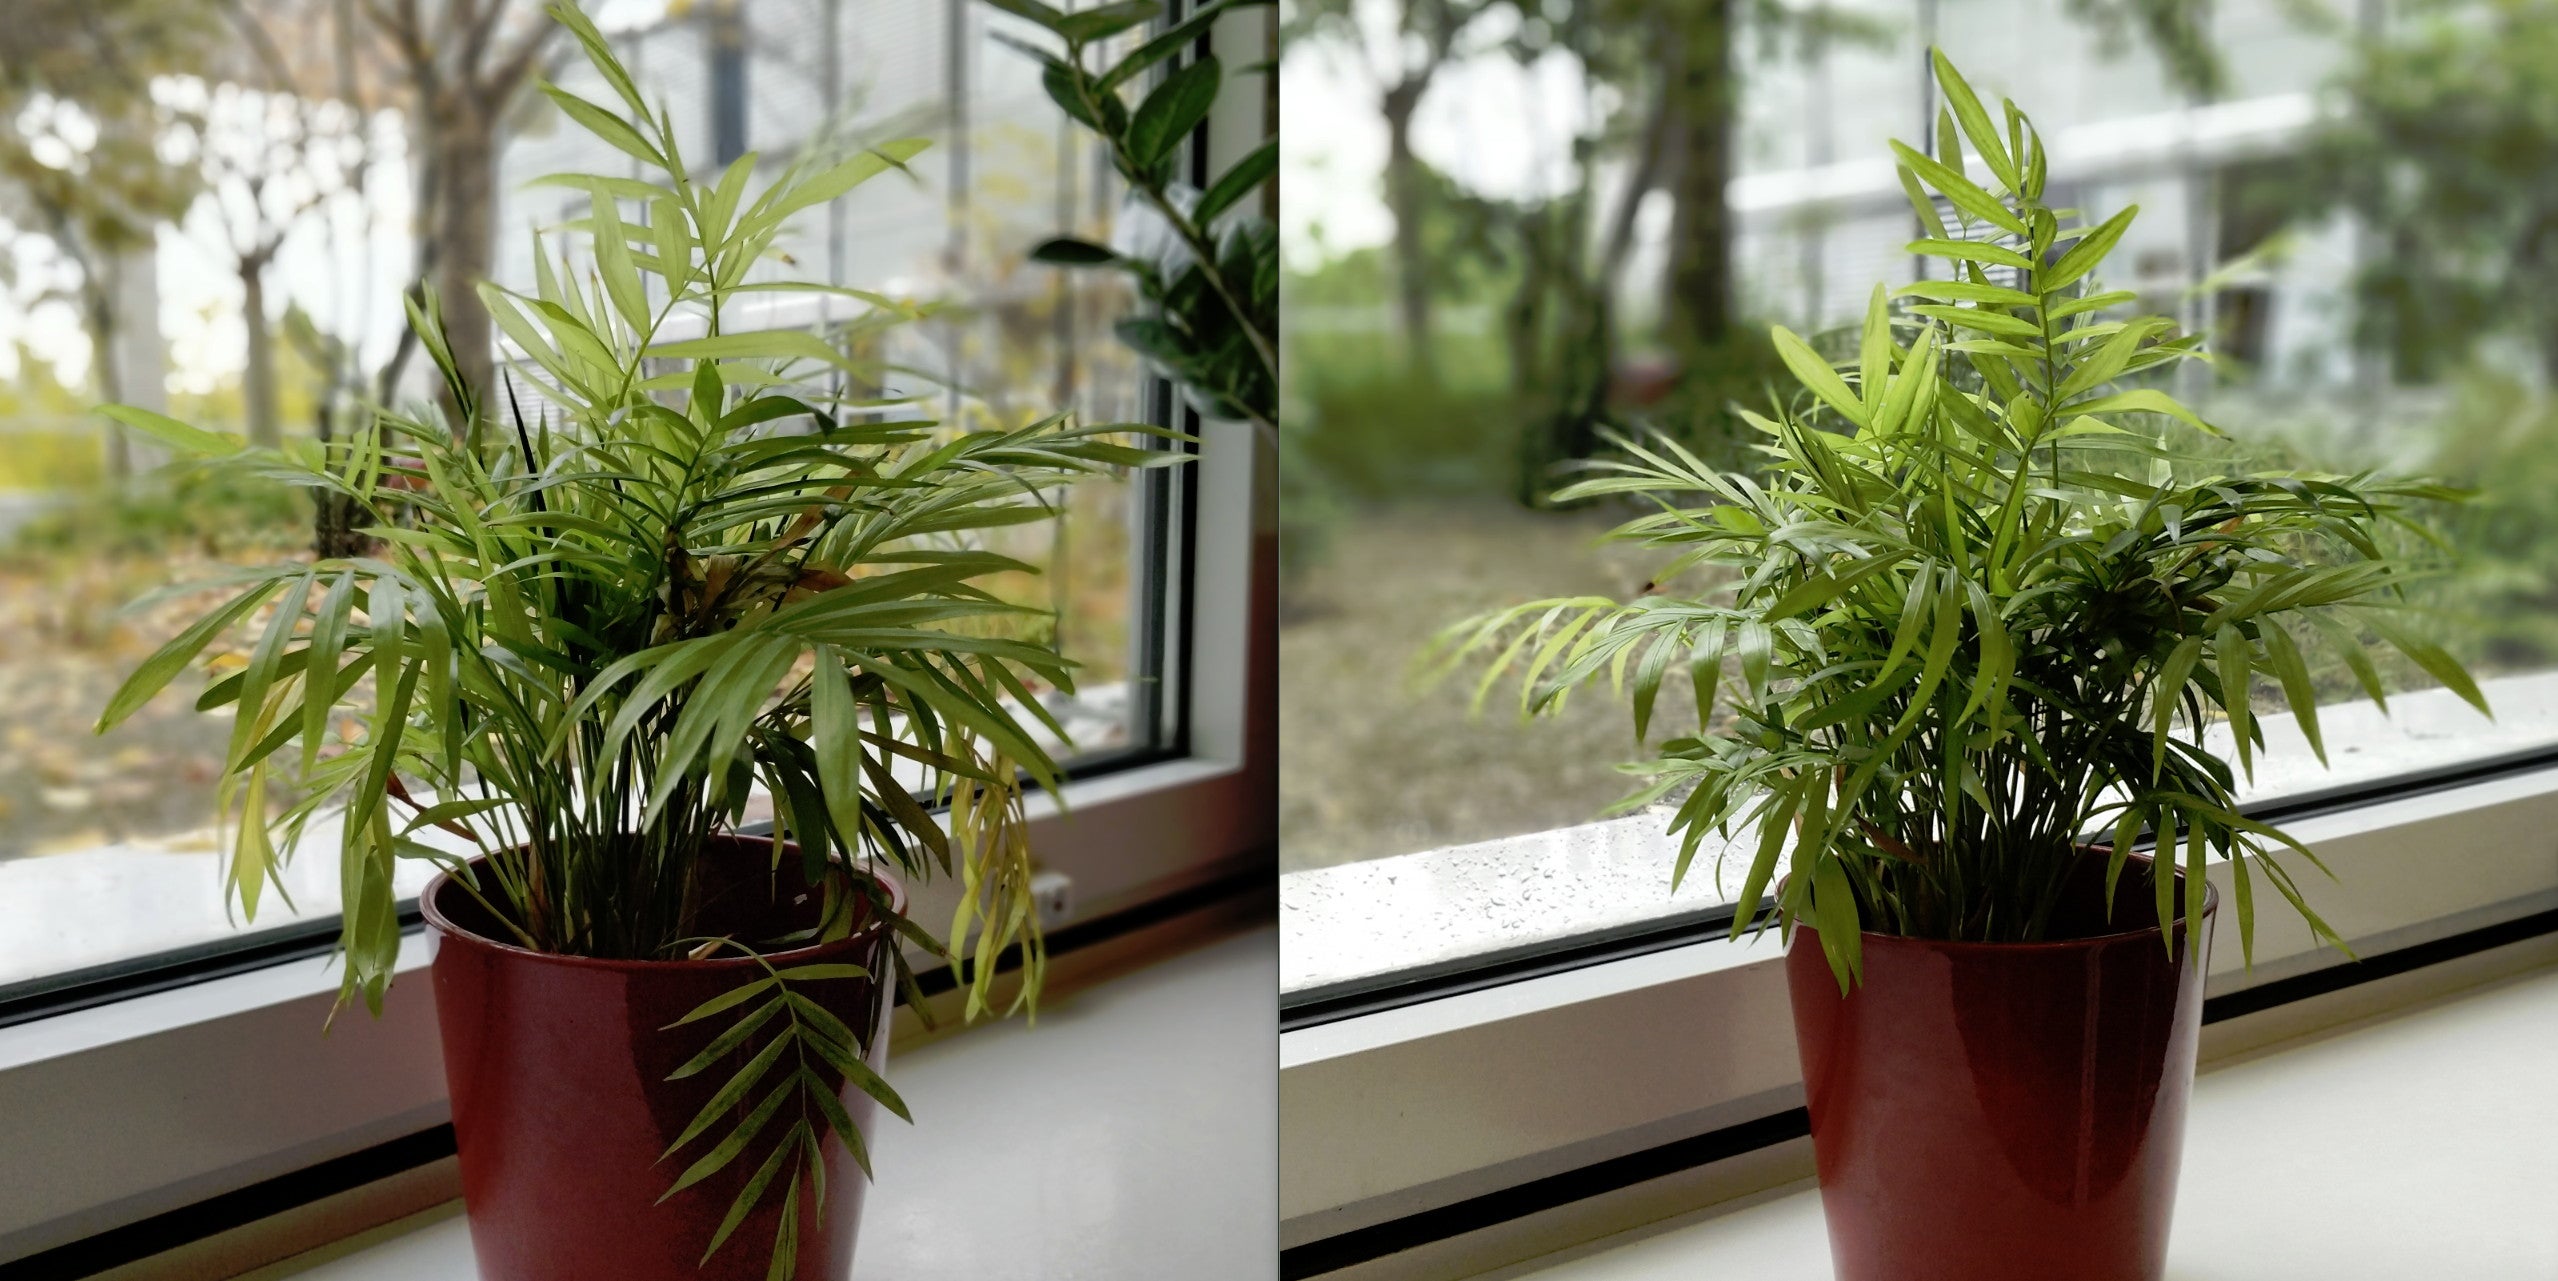 Portrait mode - OnePlus 5T (left) vs OnePlus 5 (right) - Early OnePlus 5T vs OnePlus 5 camera comparison: No telephoto lens